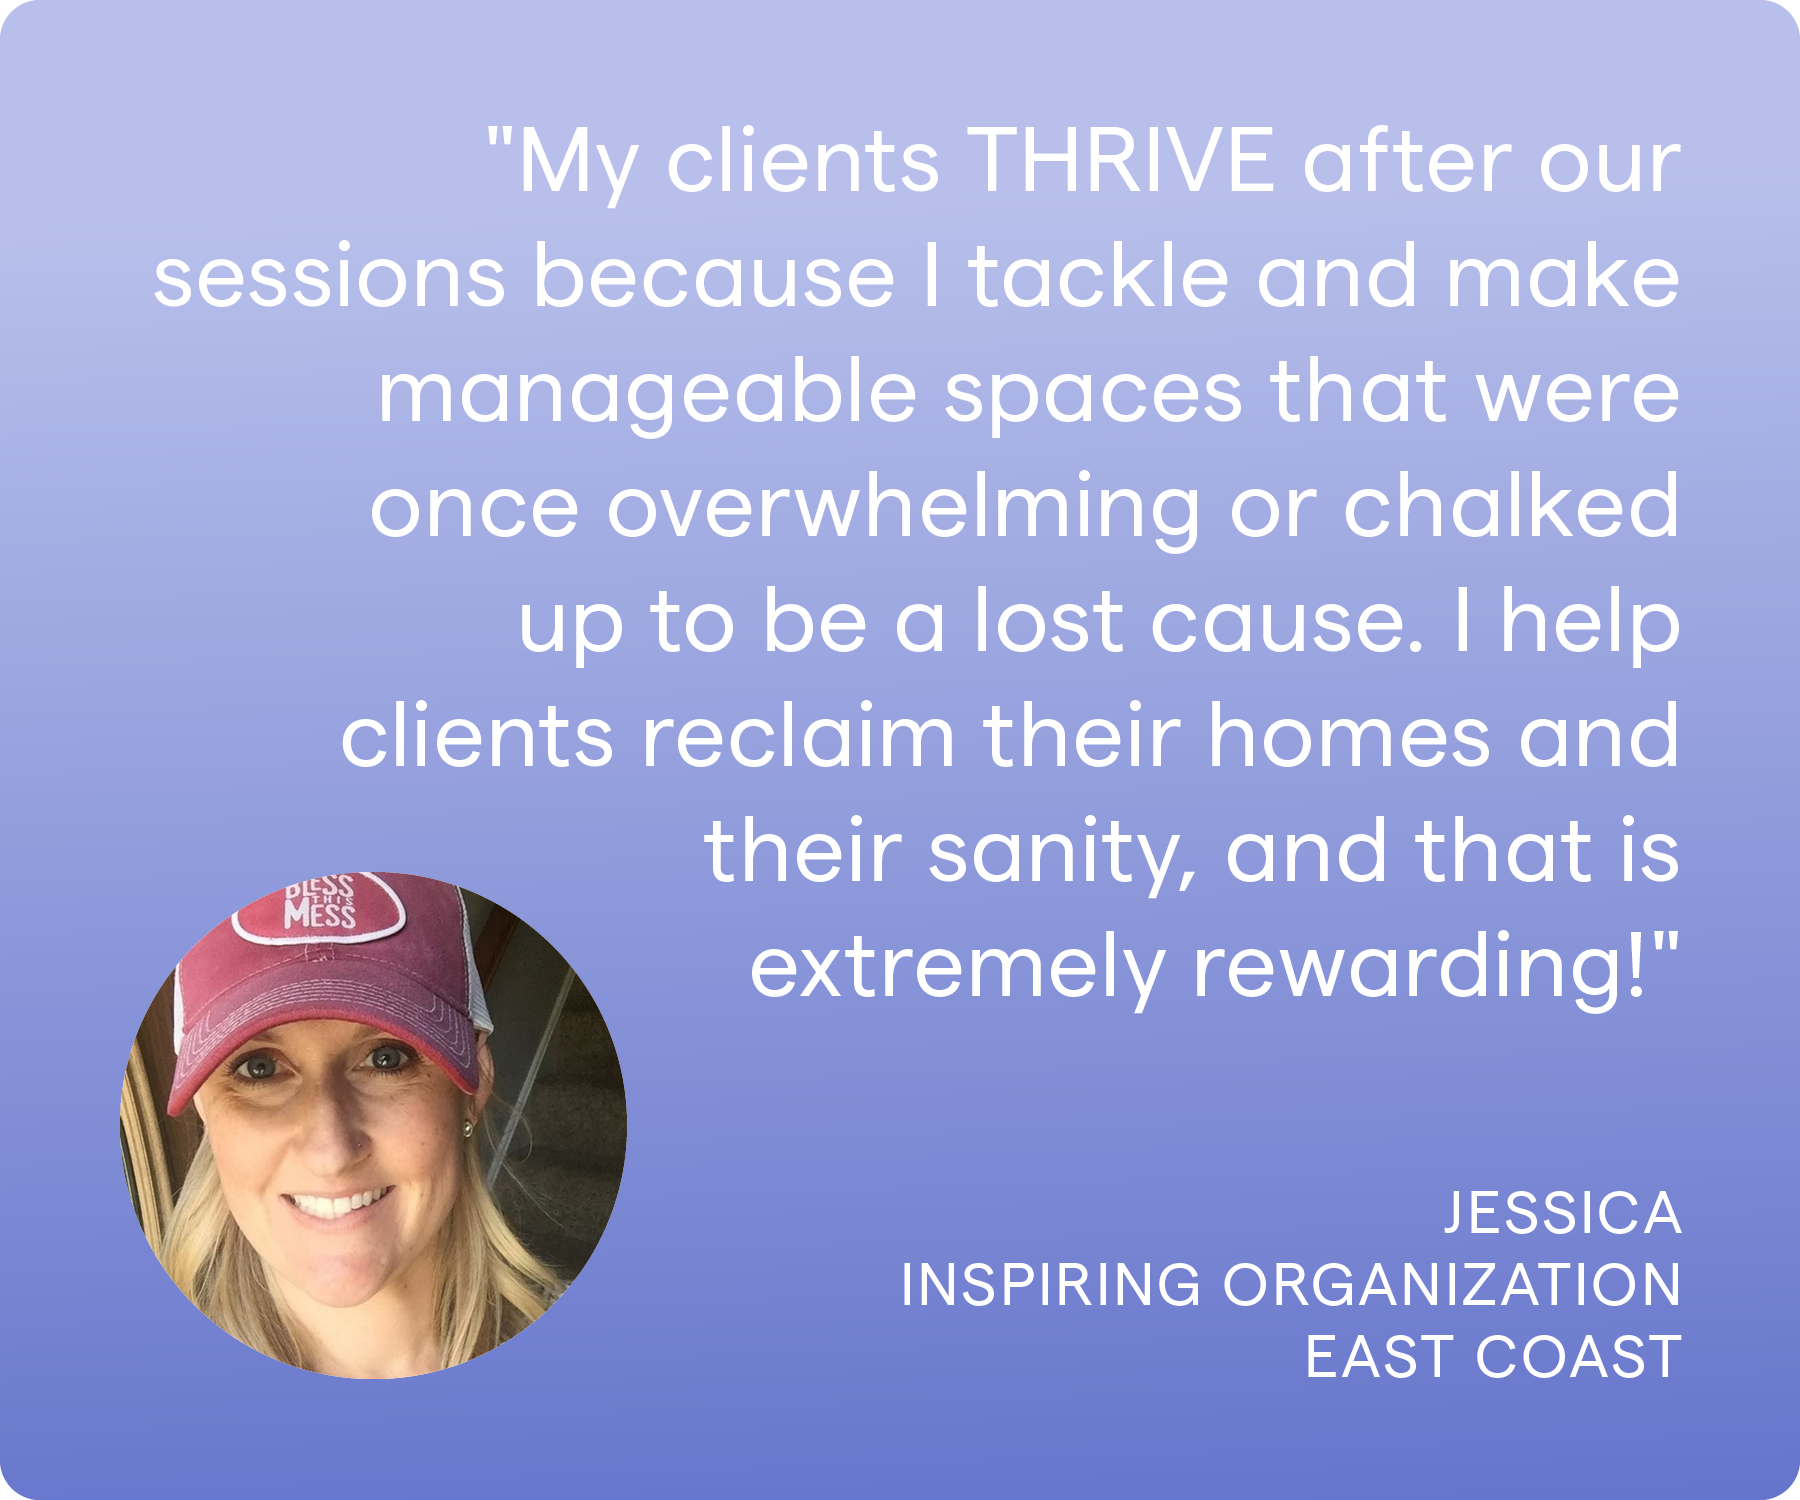 'My clients THRIVE after our sessions because I tackle and make manageable spaces that were once overwhelming or chalked up to be a lost cause. I help clients reclaim their homes and their sanity, and that is extremely rewarding!' Jessica, Inspiring Organization, East Coast